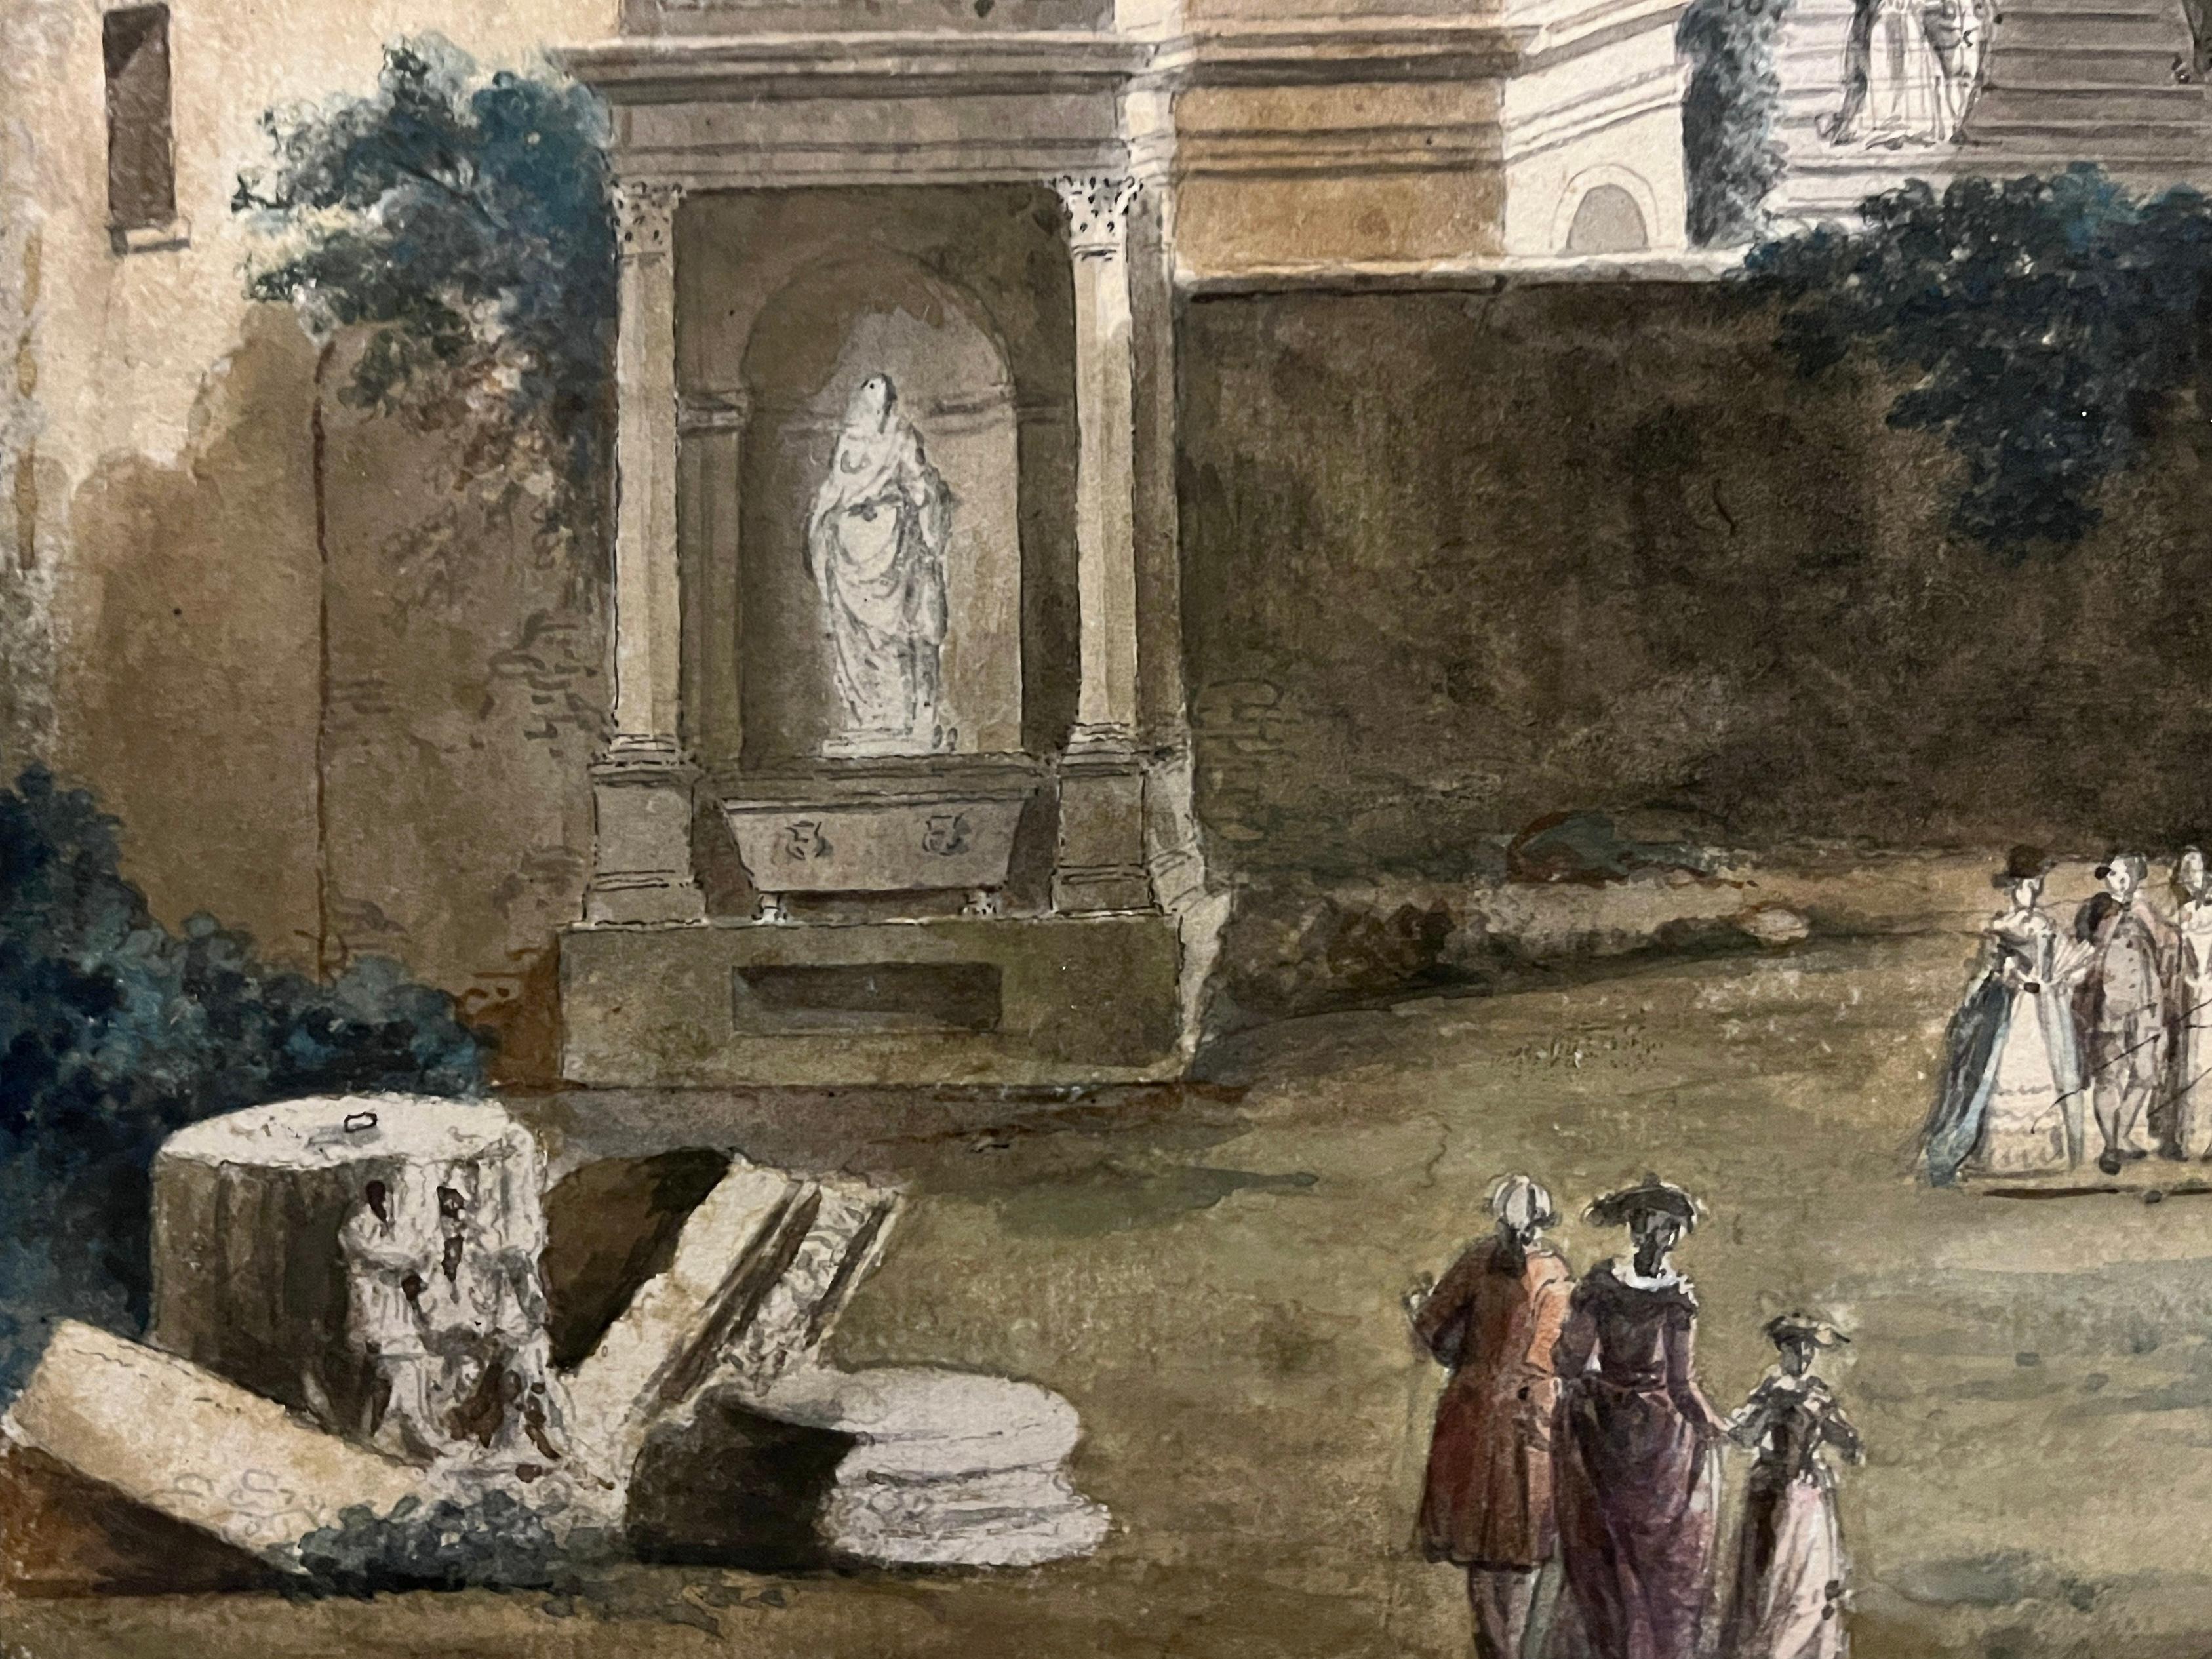 CHARLES-LOUIS CLÉRISSEAU (1721-1820)

THE GARDENS AT THE VILLA D'ESTE AT SUNSET, TIVOLI
Signed l.r. Clérisseau
Pen & black ink, pencil, and watercolour, heightened with bodycolour
45.1 x 59 cm  81 x 77 cm [Framed]
 
Provenance:
[Purchased by a